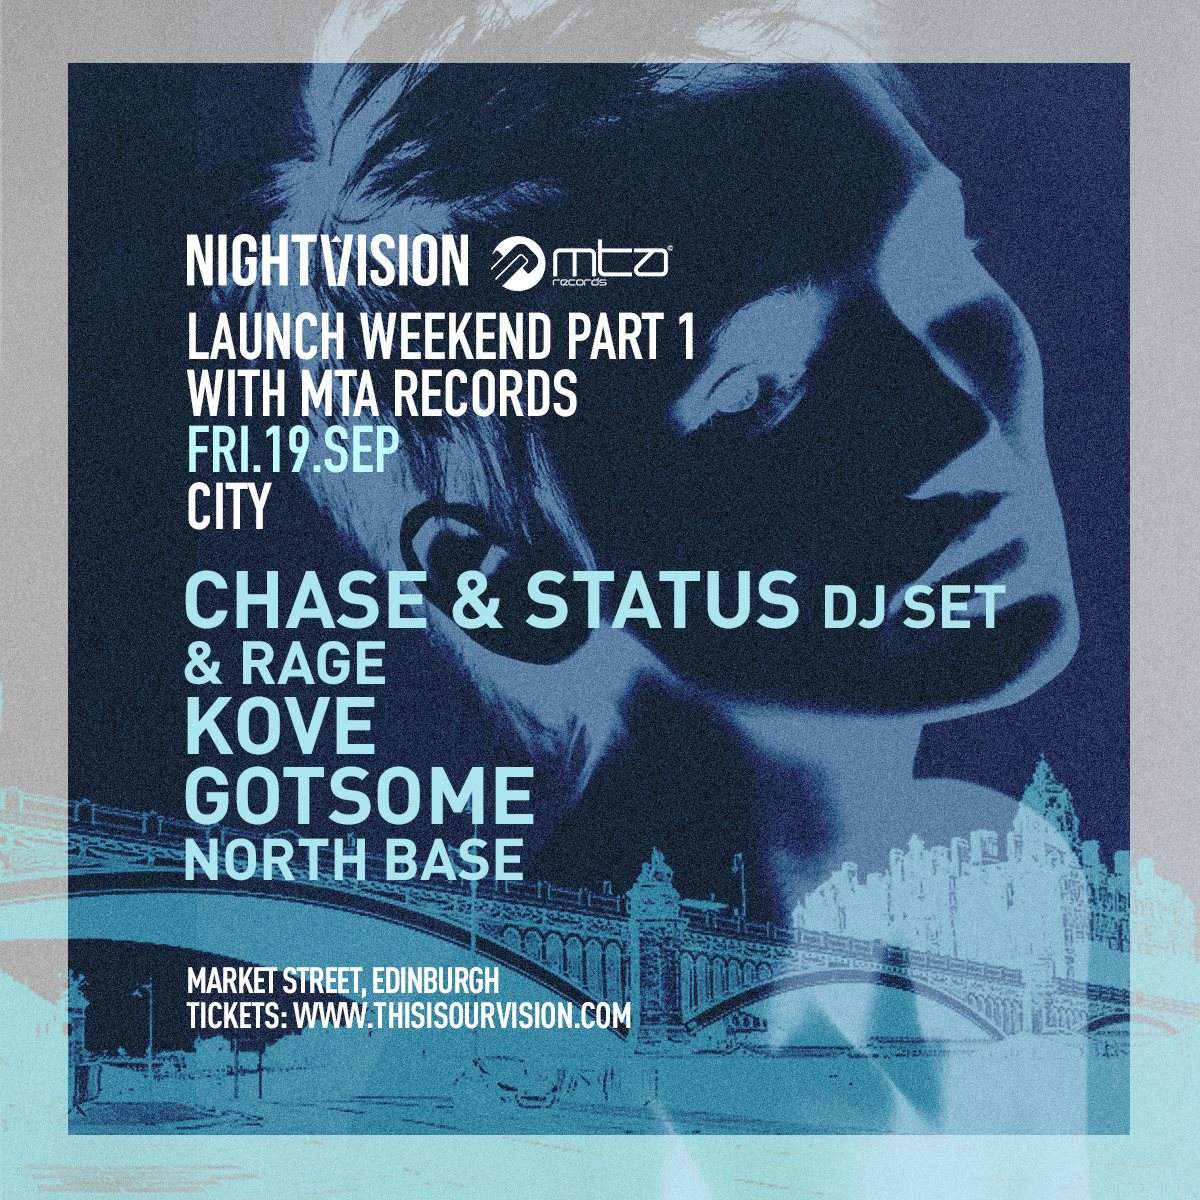 Nightvision Launch Weekend Part 1 with MTA Records -  Chase & Status (DJ Set), Kove, GotSome - フライヤー表